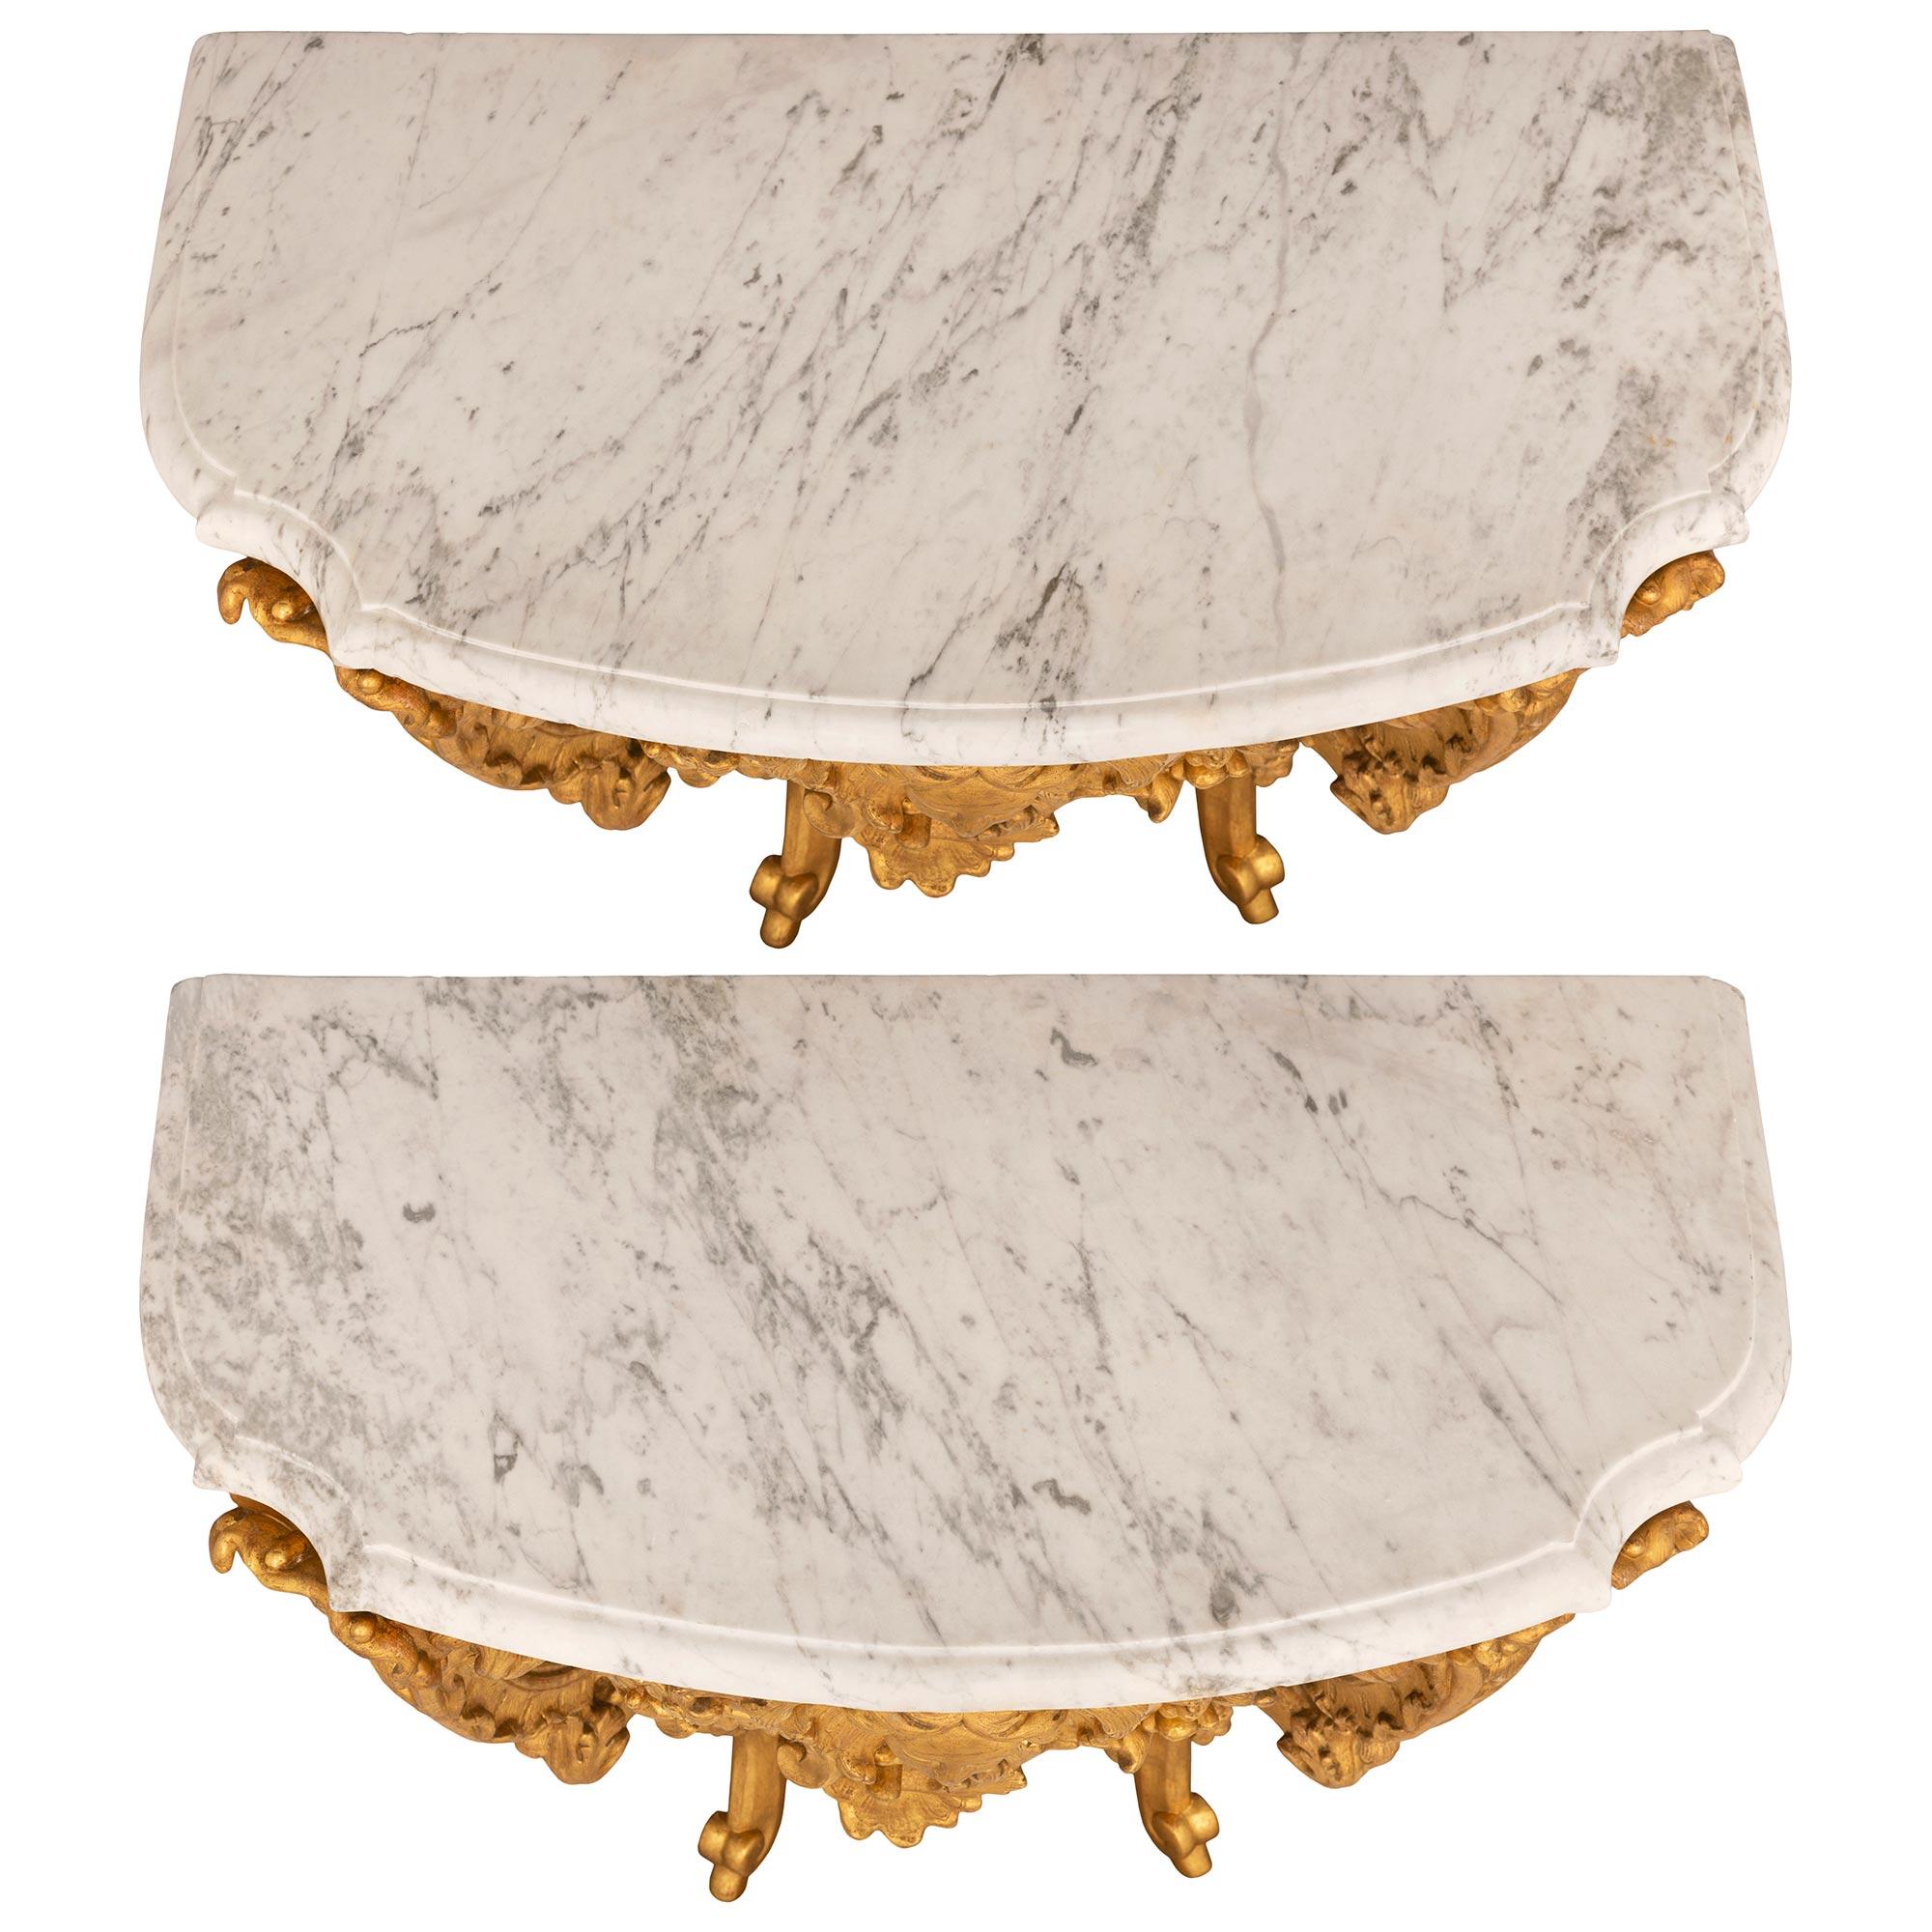 A beautiful true pair of Italian 18th century Louis XV period giltwood and white Carrara marble consoles. Each wall mounted console is raised by two elegant scrolled legs with lovely scrolled feet and a remarkable most decorative array of richly